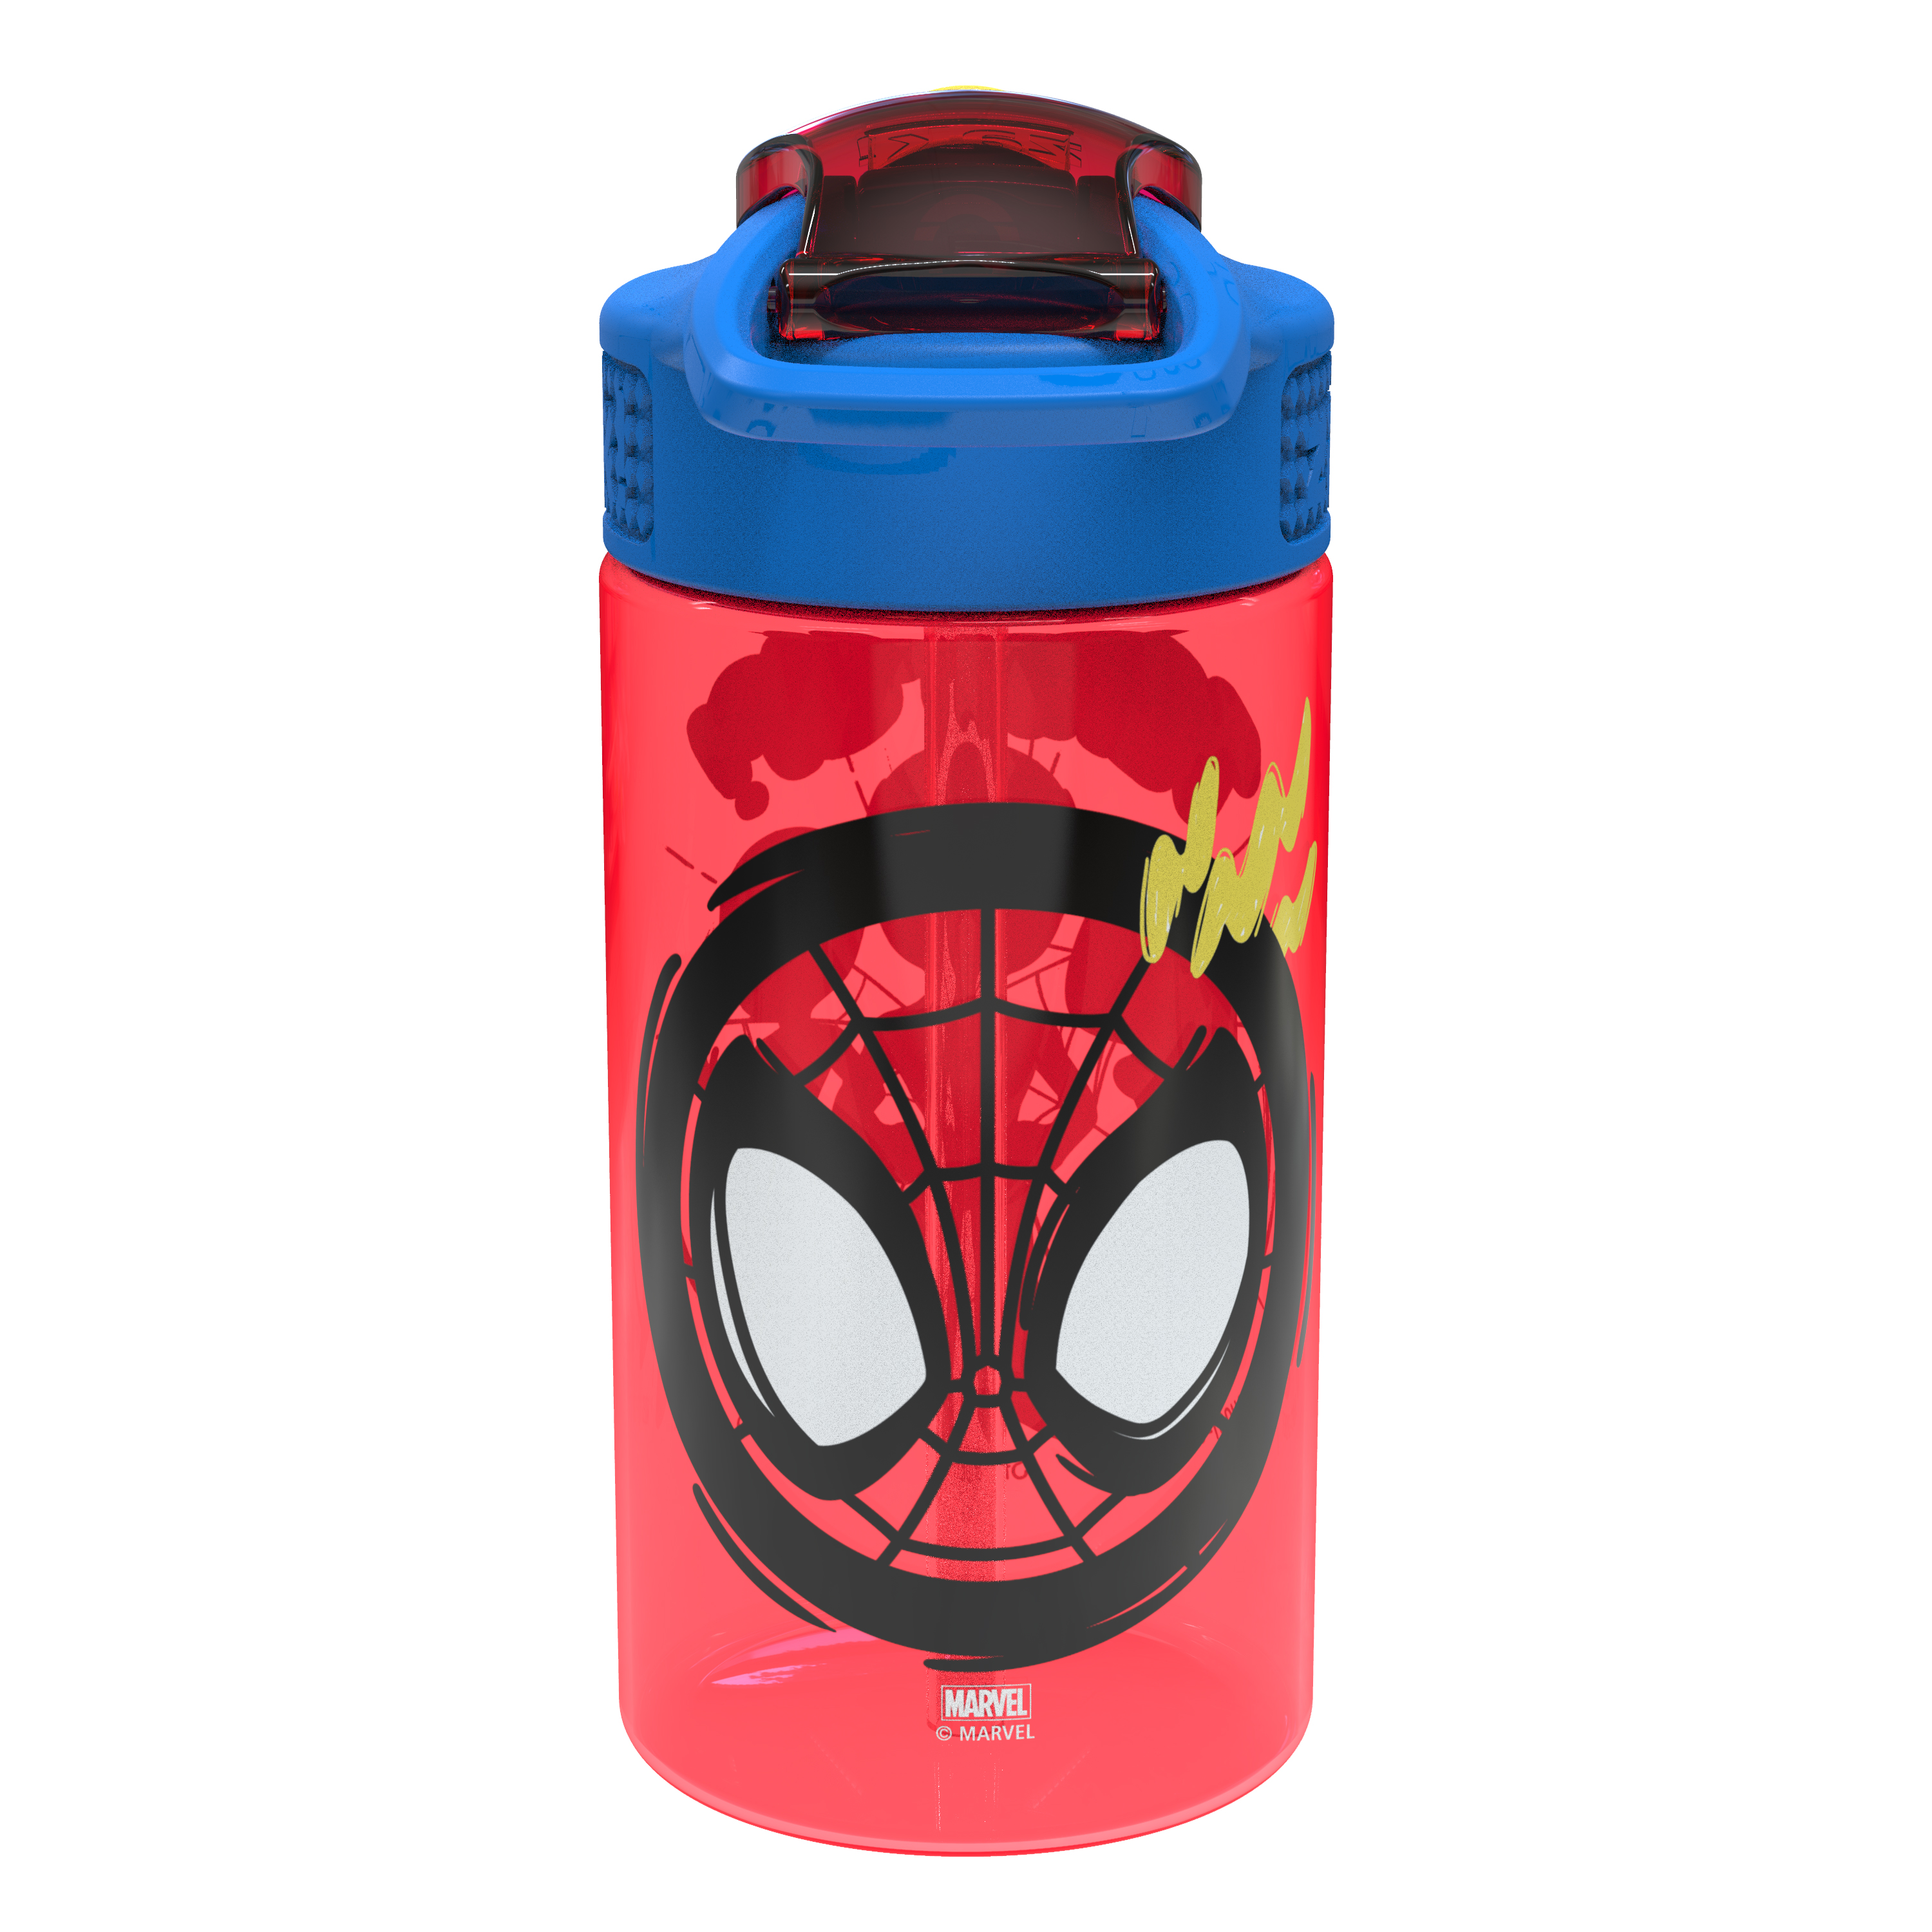 Spider-Man and His Amazing Friends 16 ounce Reusable Plastic Water Bottle with Straw, Spider-Friends, 2-piece set slideshow image 5